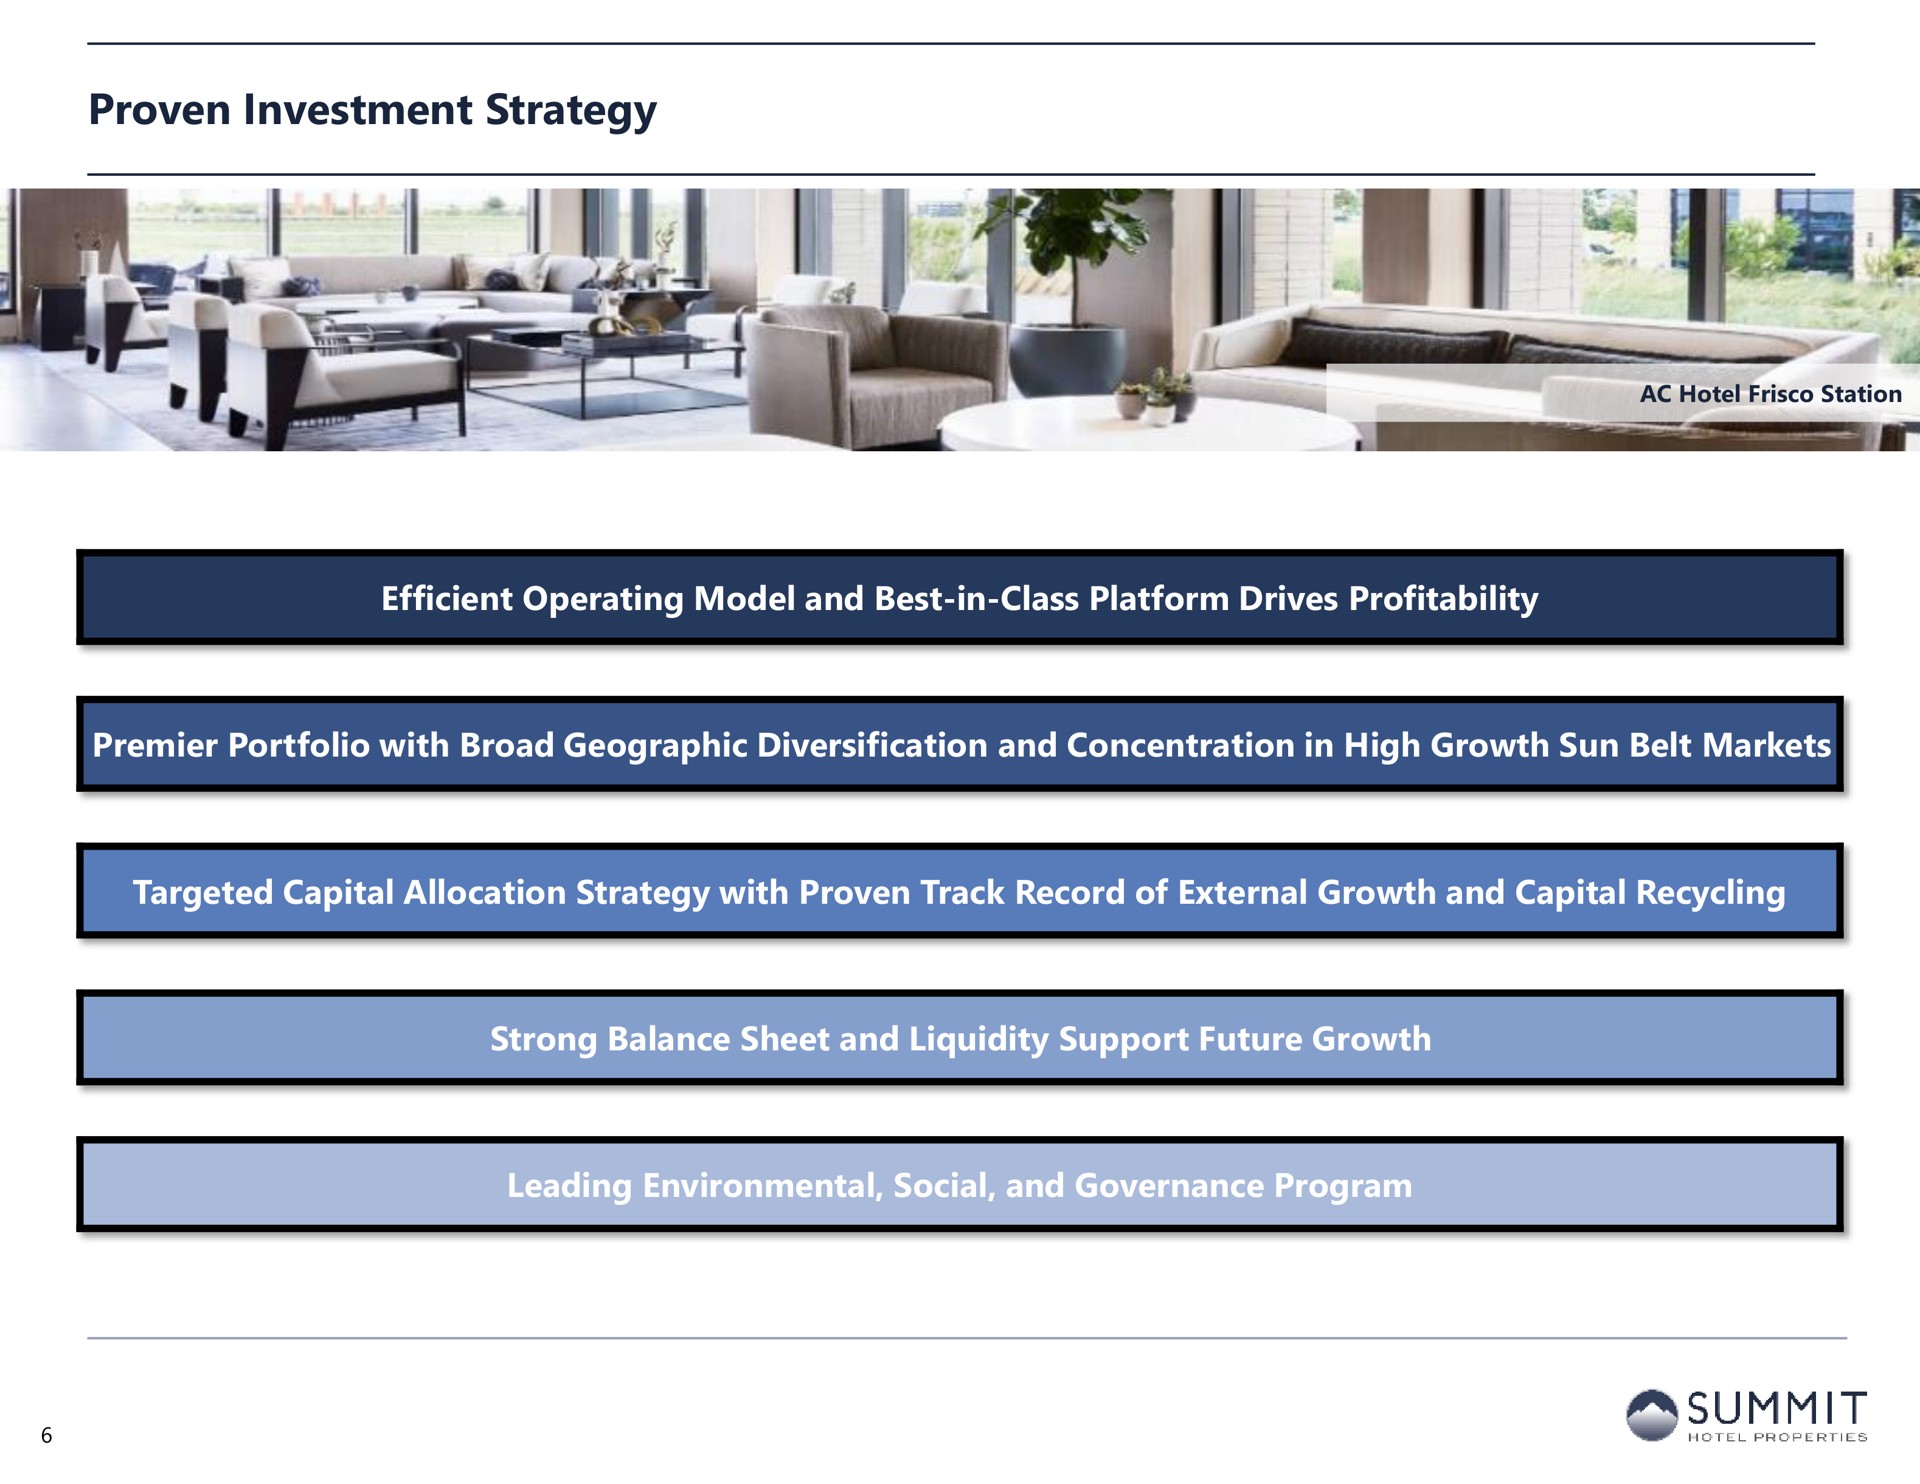 proven investment strategy | Summit Hotel Properties